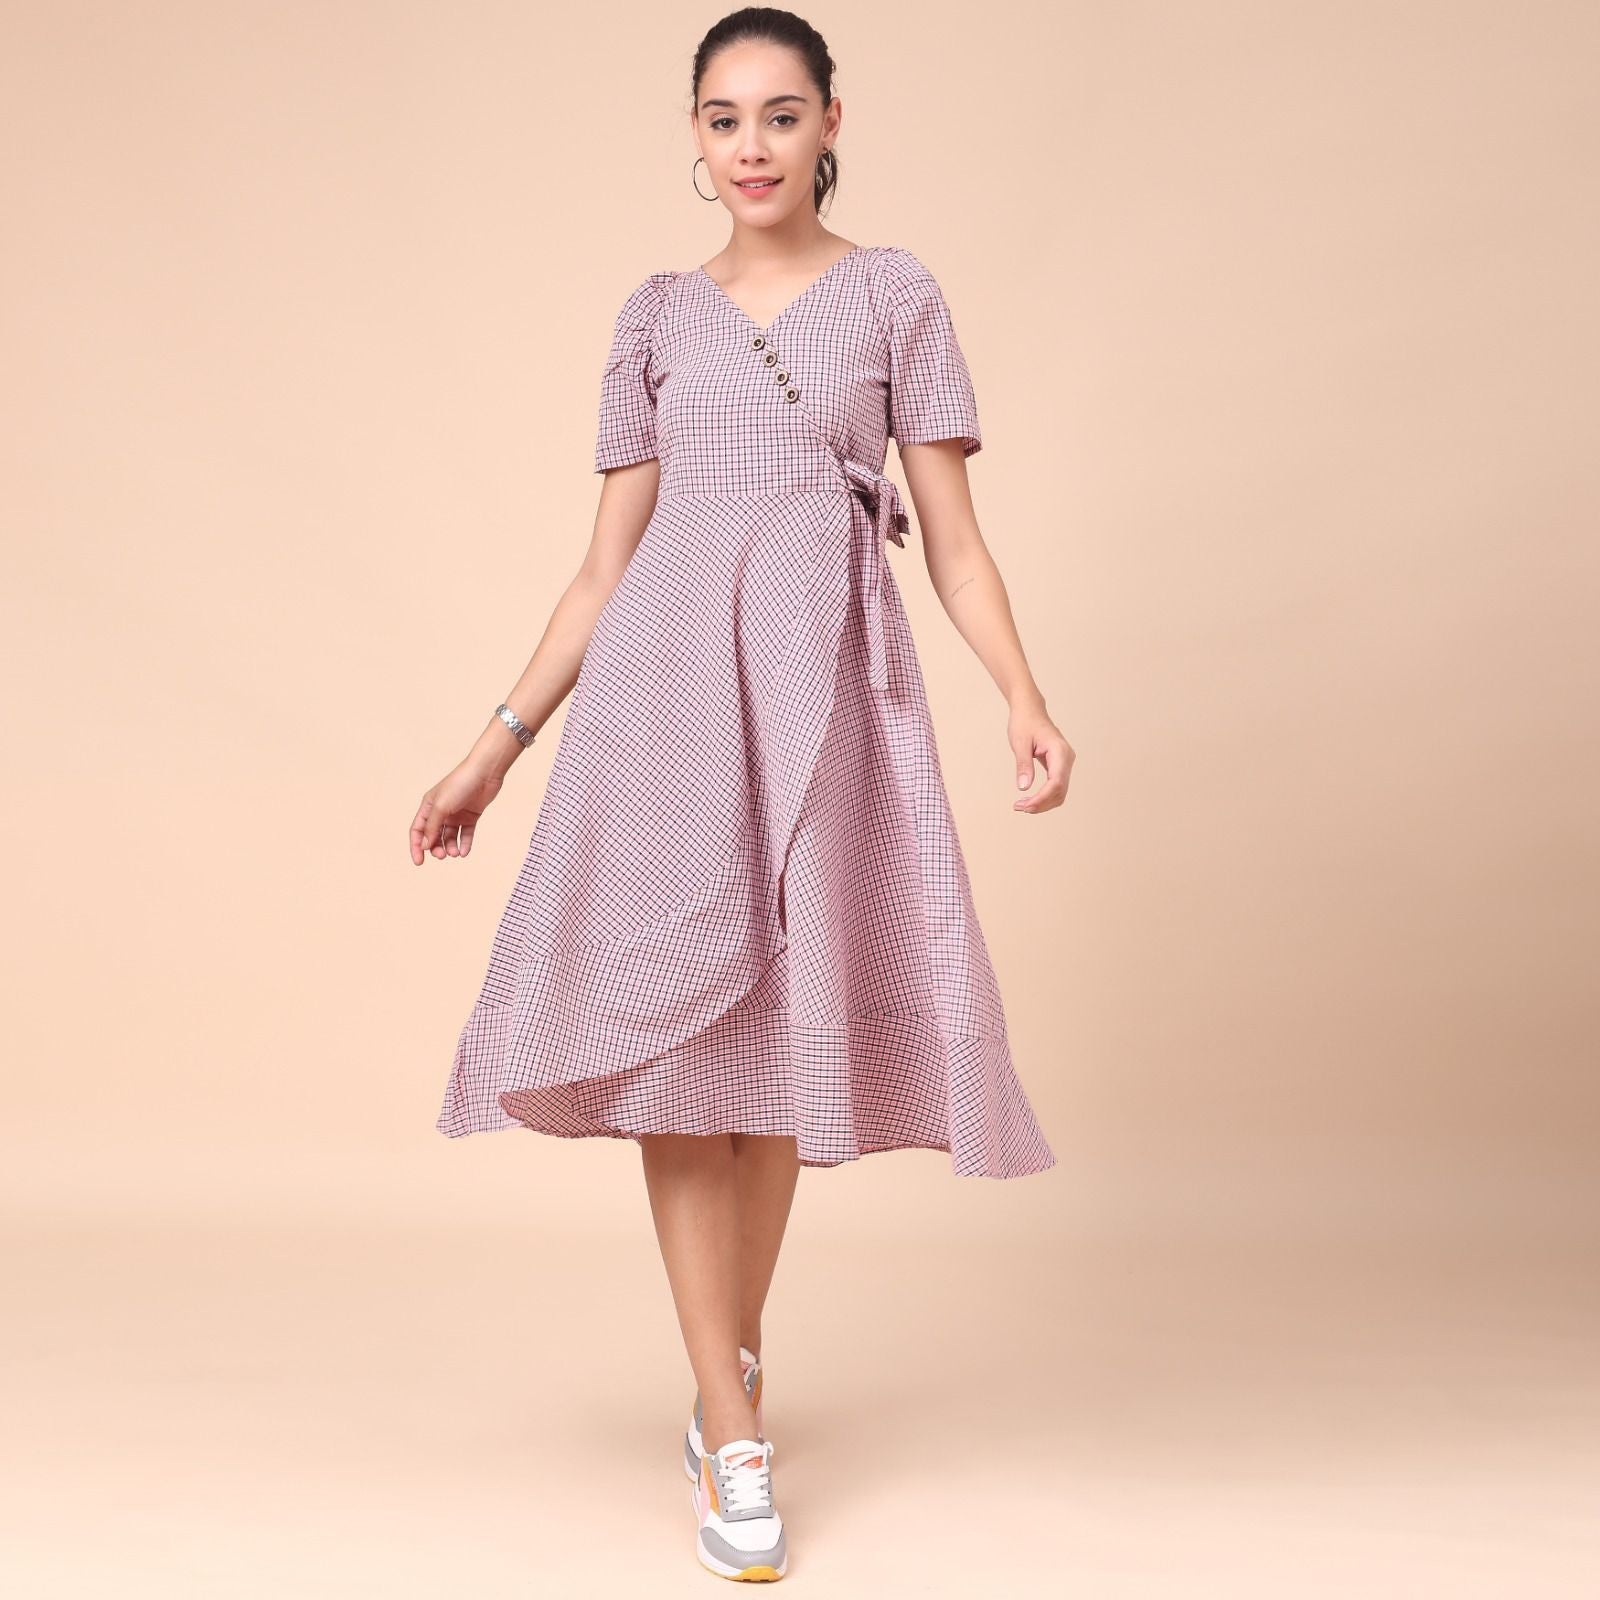 The model in the image is wearing Women's Cotton Knee Length Fit And Flare Dress from Alice Milan. Crafted with the finest materials and impeccable attention to detail, the Dress looks premium, trendy, luxurious and offers unparalleled comfort. It’s a perfect clothing option for loungewear, resort wear, party wear or for an airport look. The woman in the image looks happy, and confident with her style statement putting a happy smile on her face.